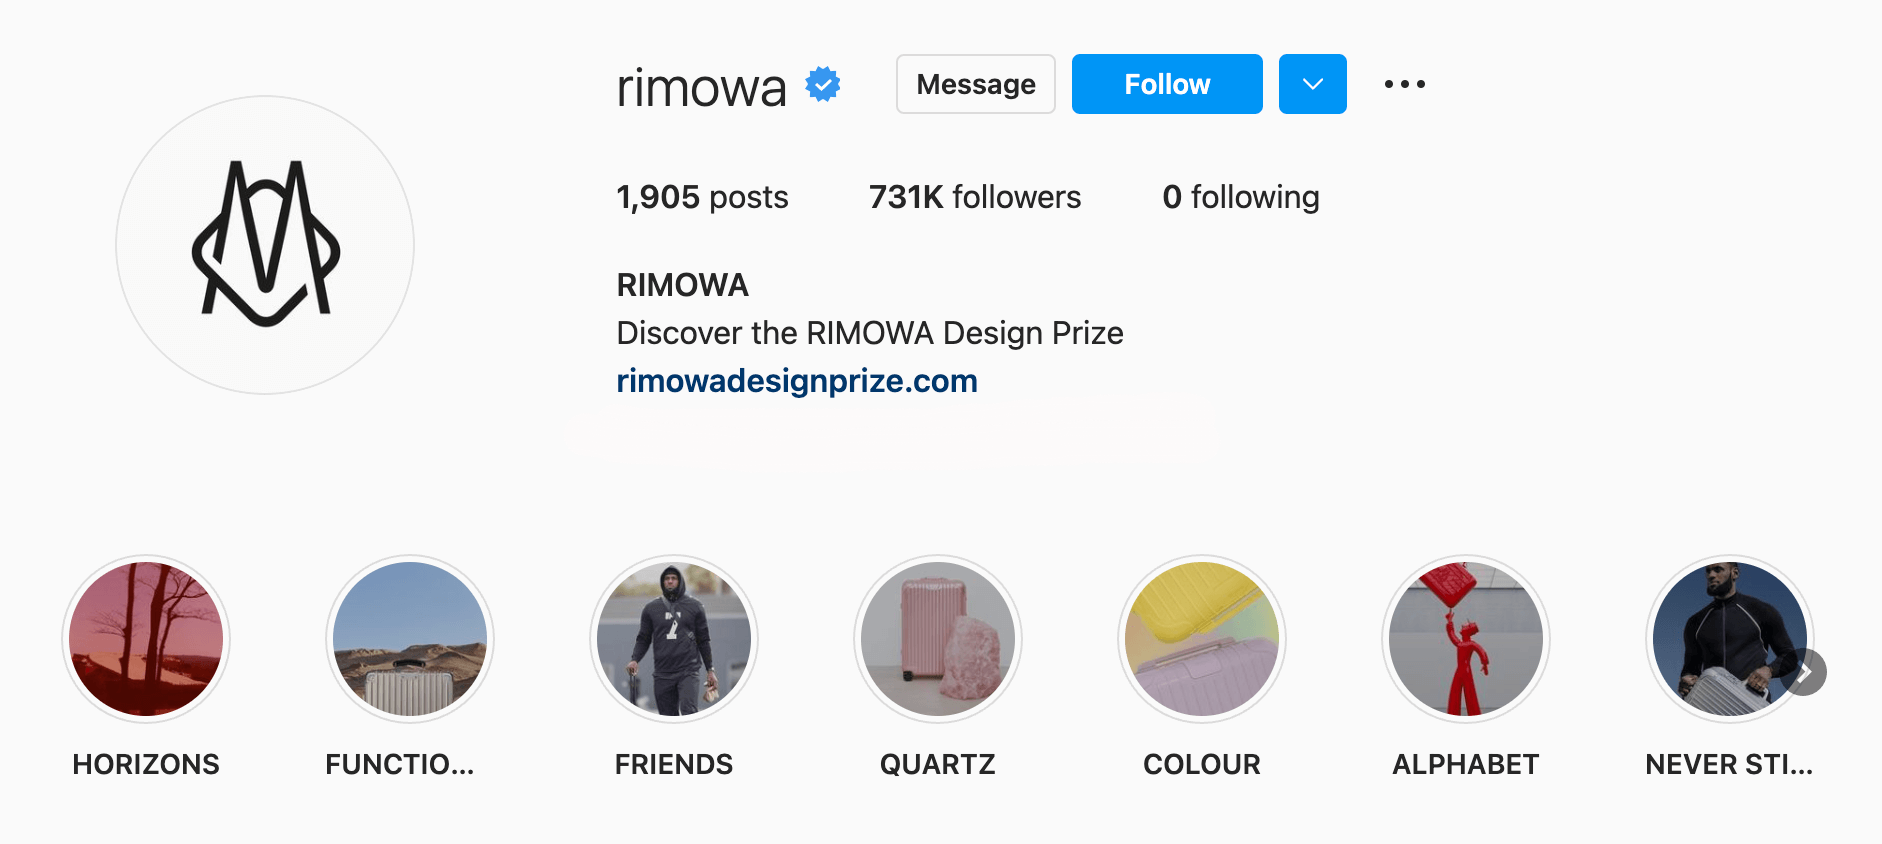 rimowa instagram profile white and black rimowa logo and seven story highlights